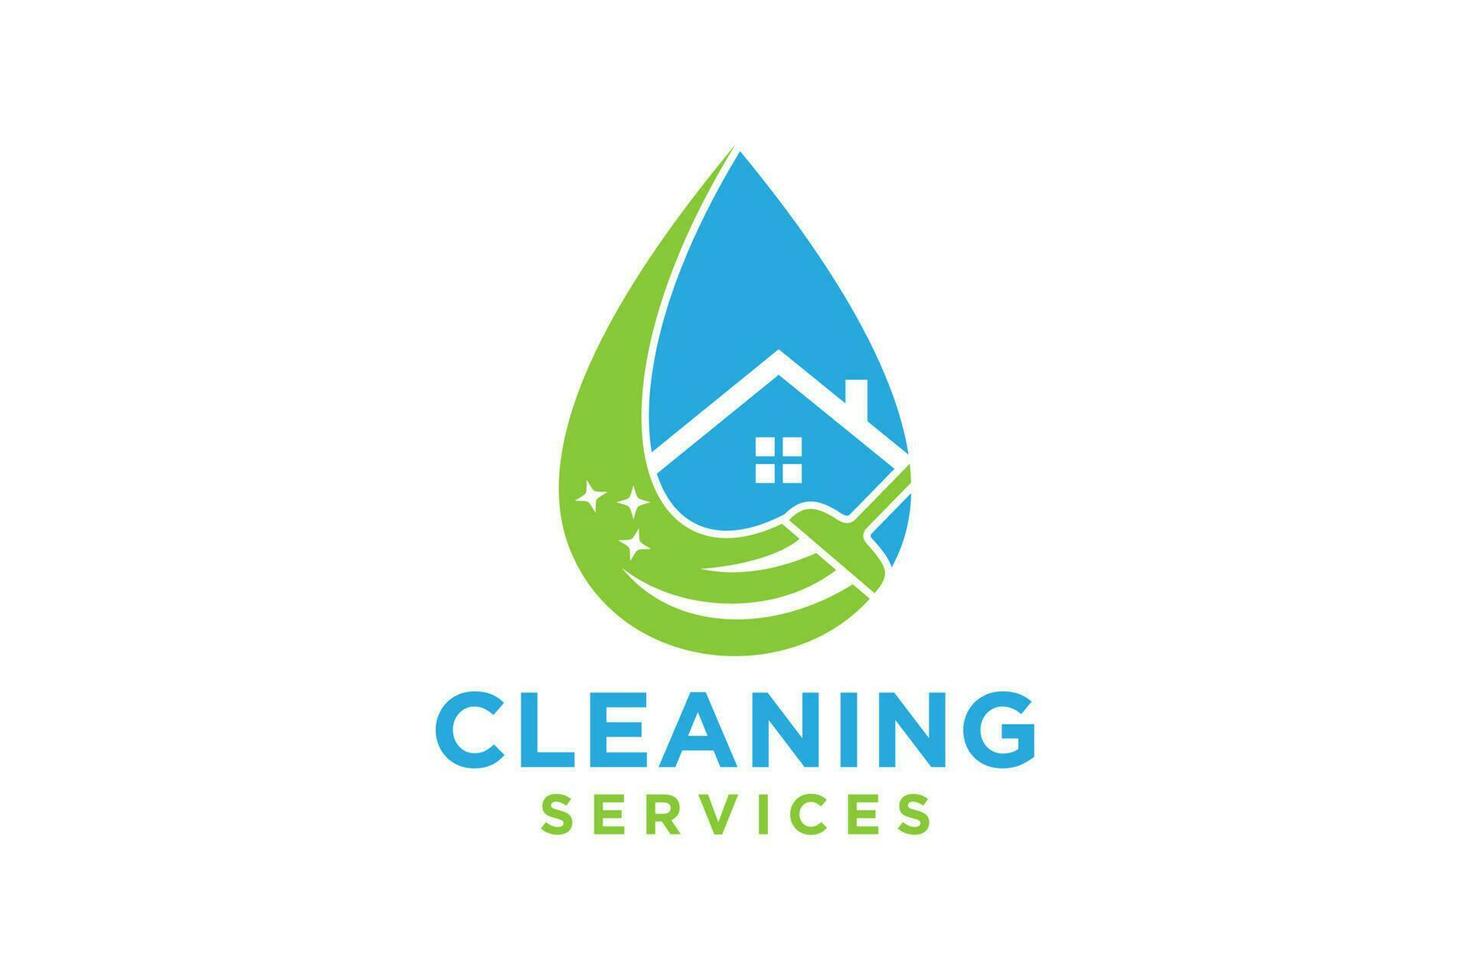 Cleaning Service Logo Design Inspiration. vector